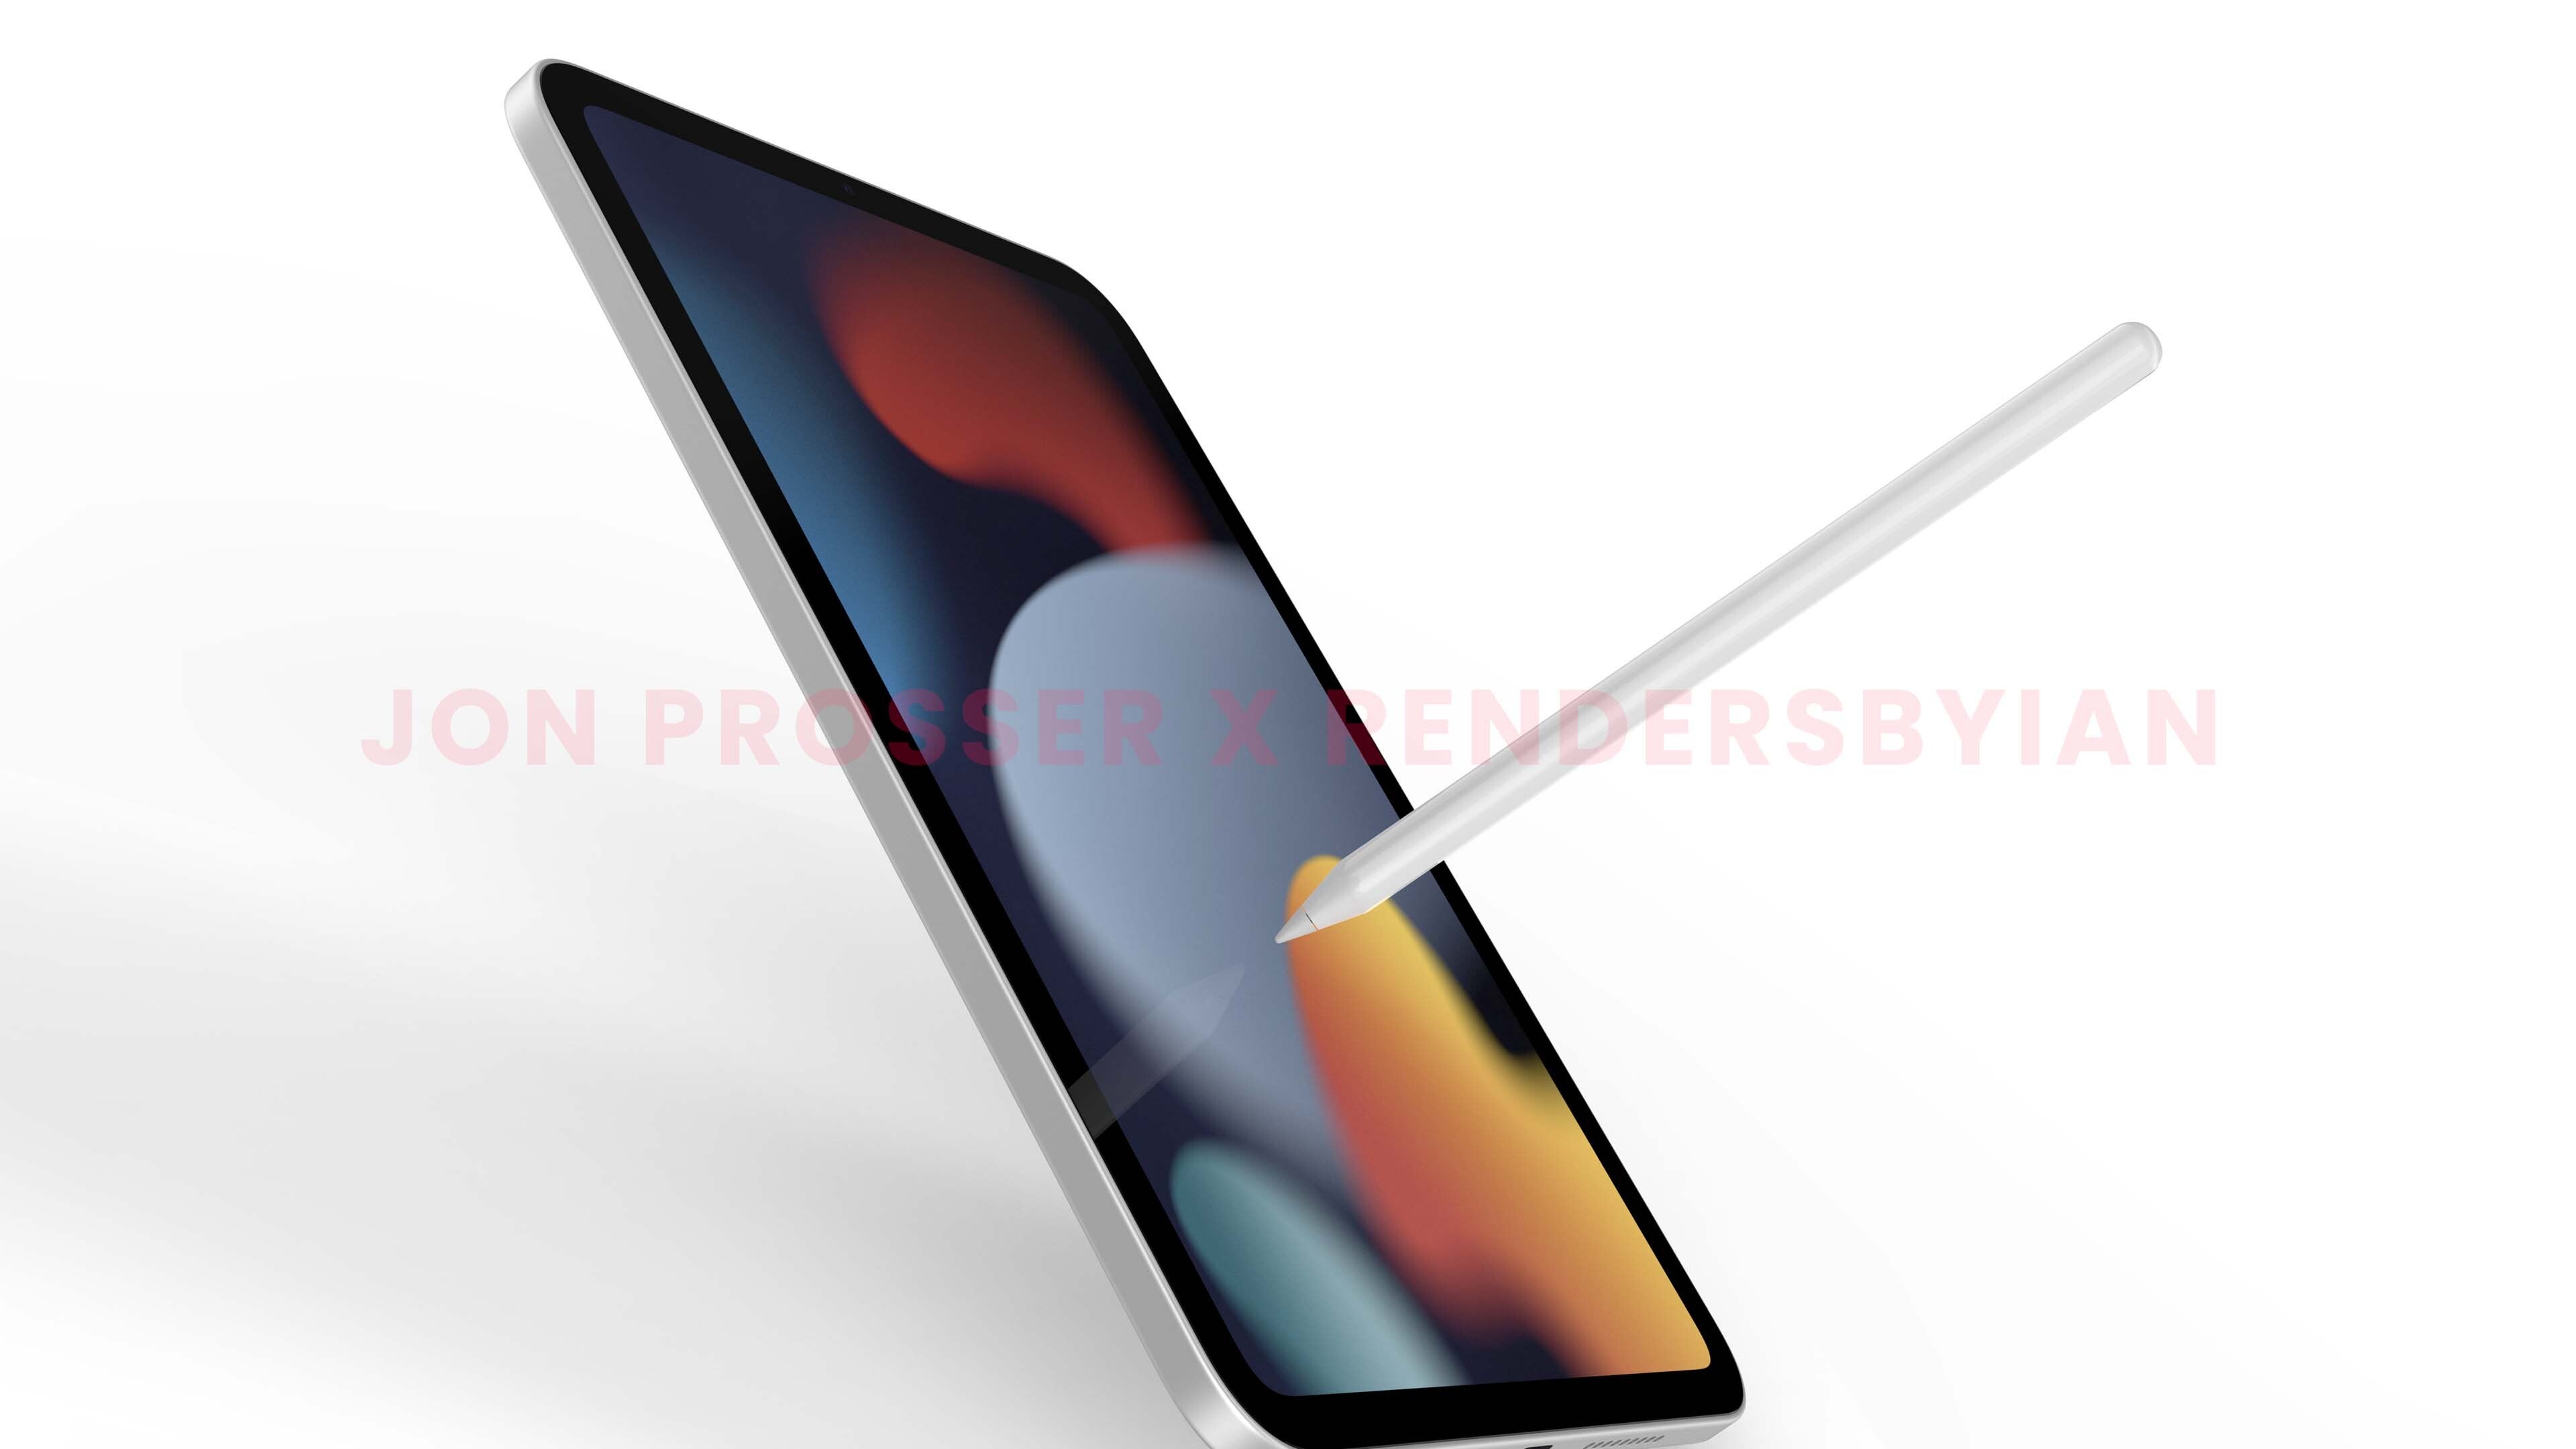 Redesigned iPad mini 6 leaks with iPad Air-like design, USB-C, much more